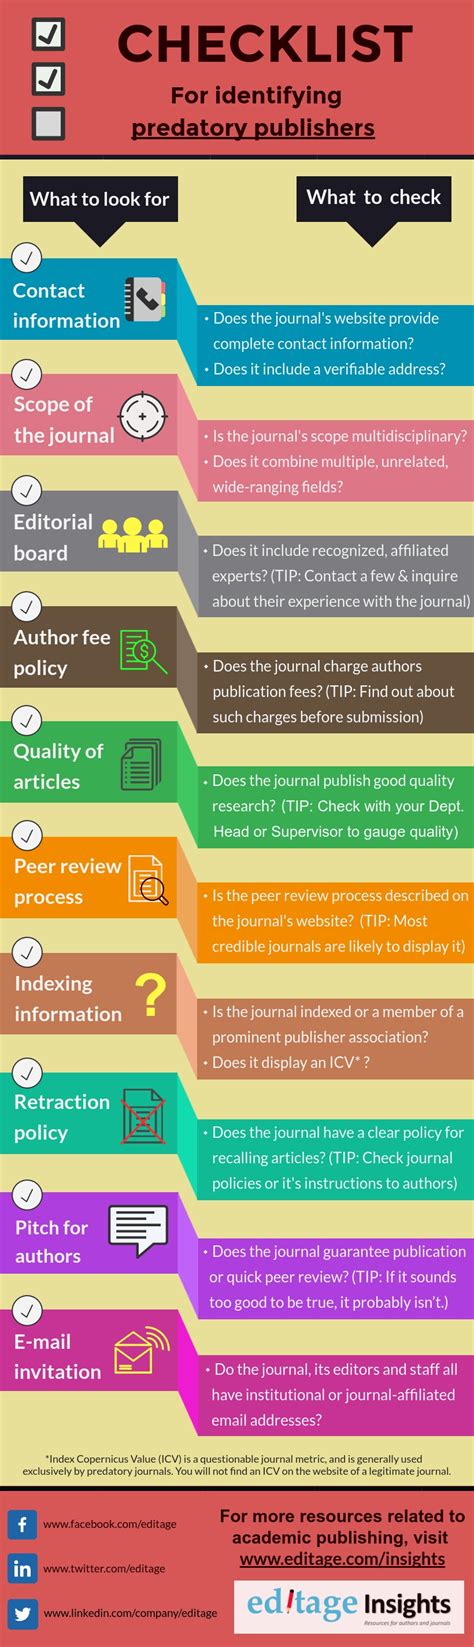 10 Point Checklist To Identifying Predatory Publishers Infographic